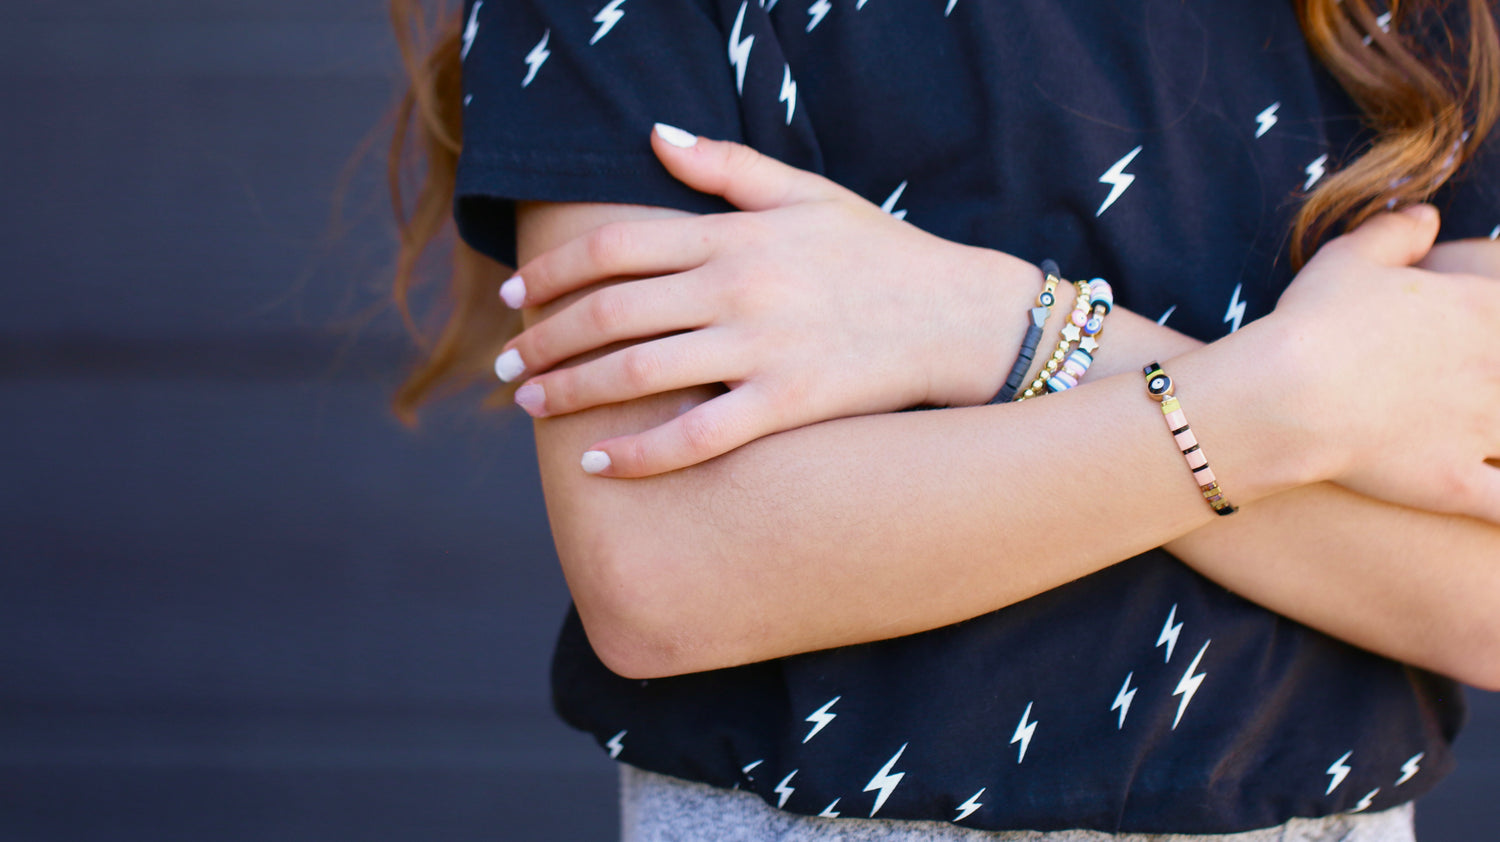 image highlighting the bracelets on a young girls arm.  she has them crisscrossed against her black shirt with white lighting bolts across.